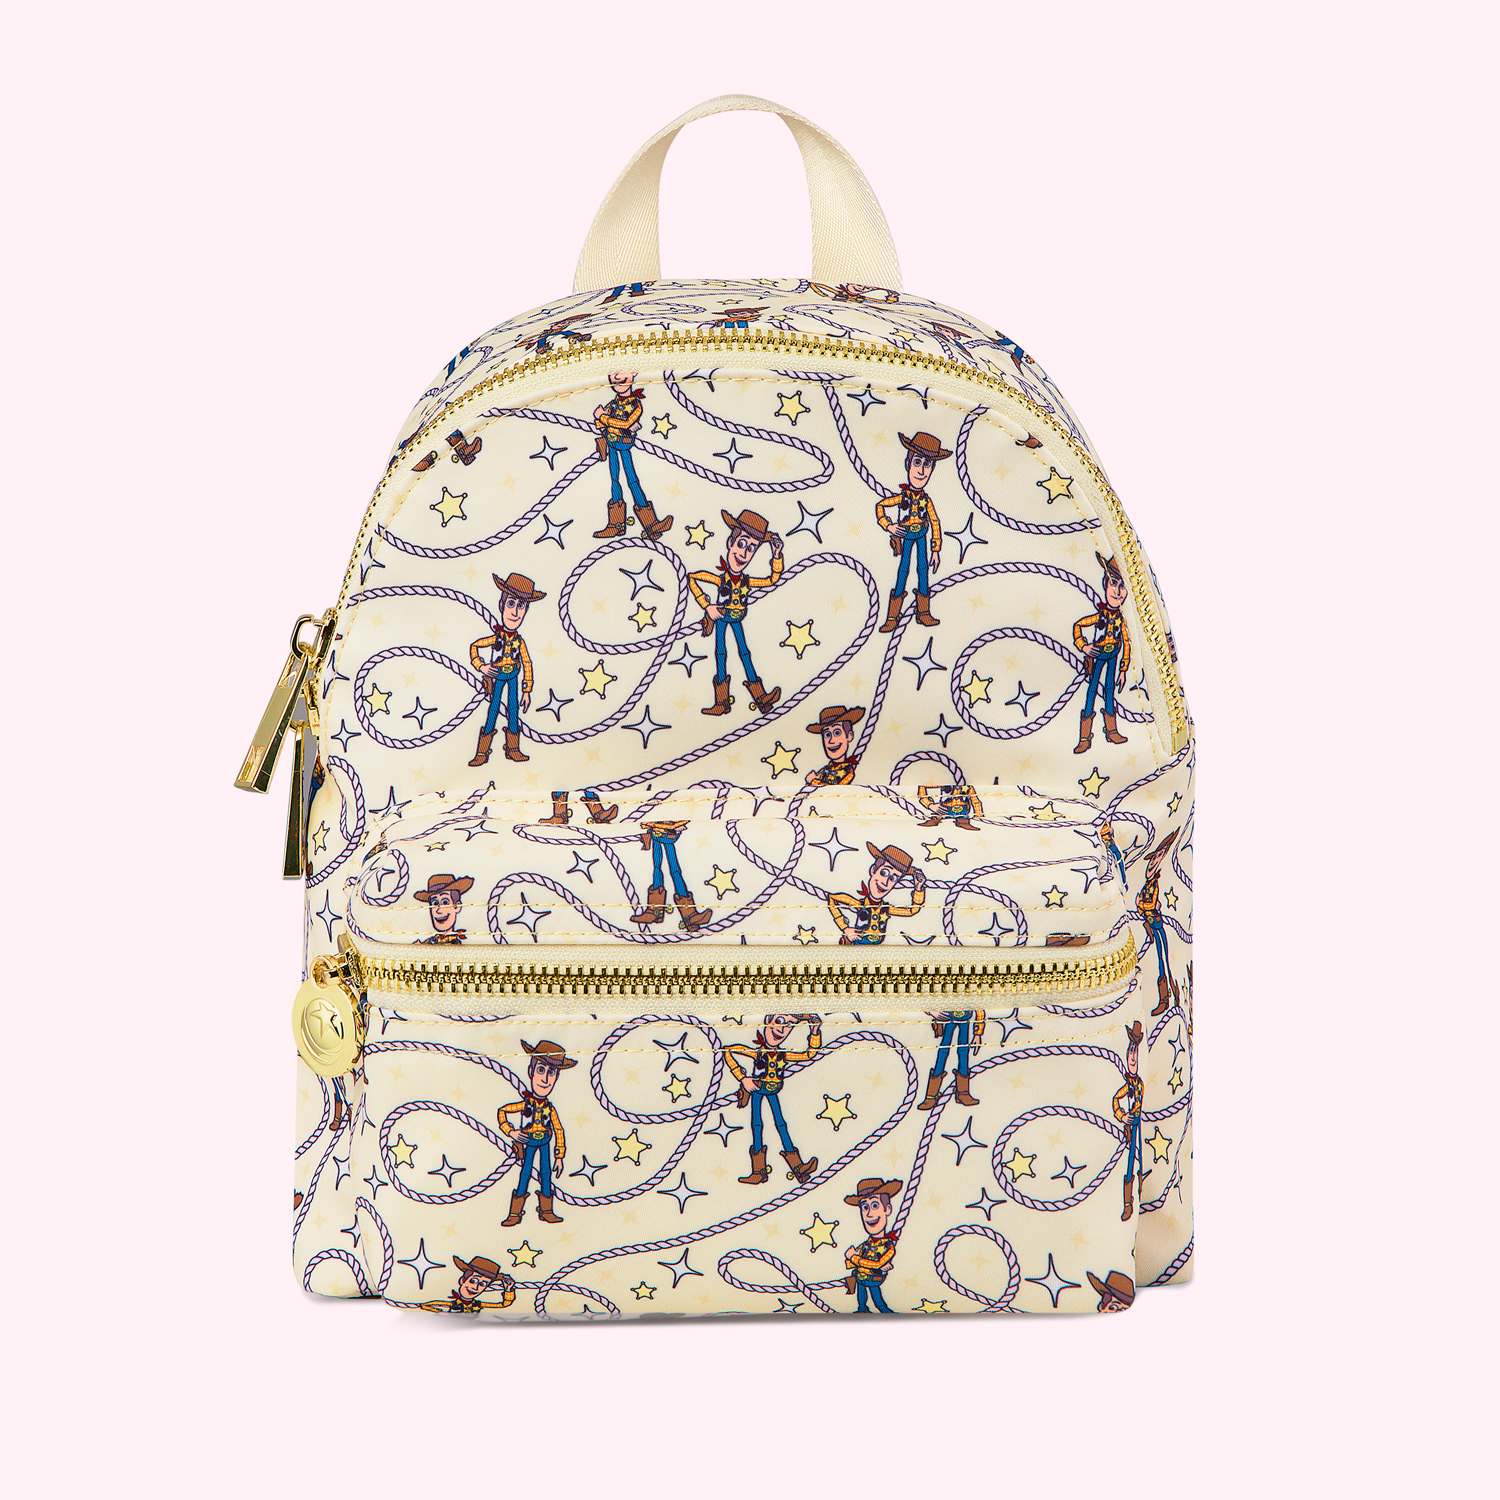 Disney and Pixar's Toy Story Micro Backpack